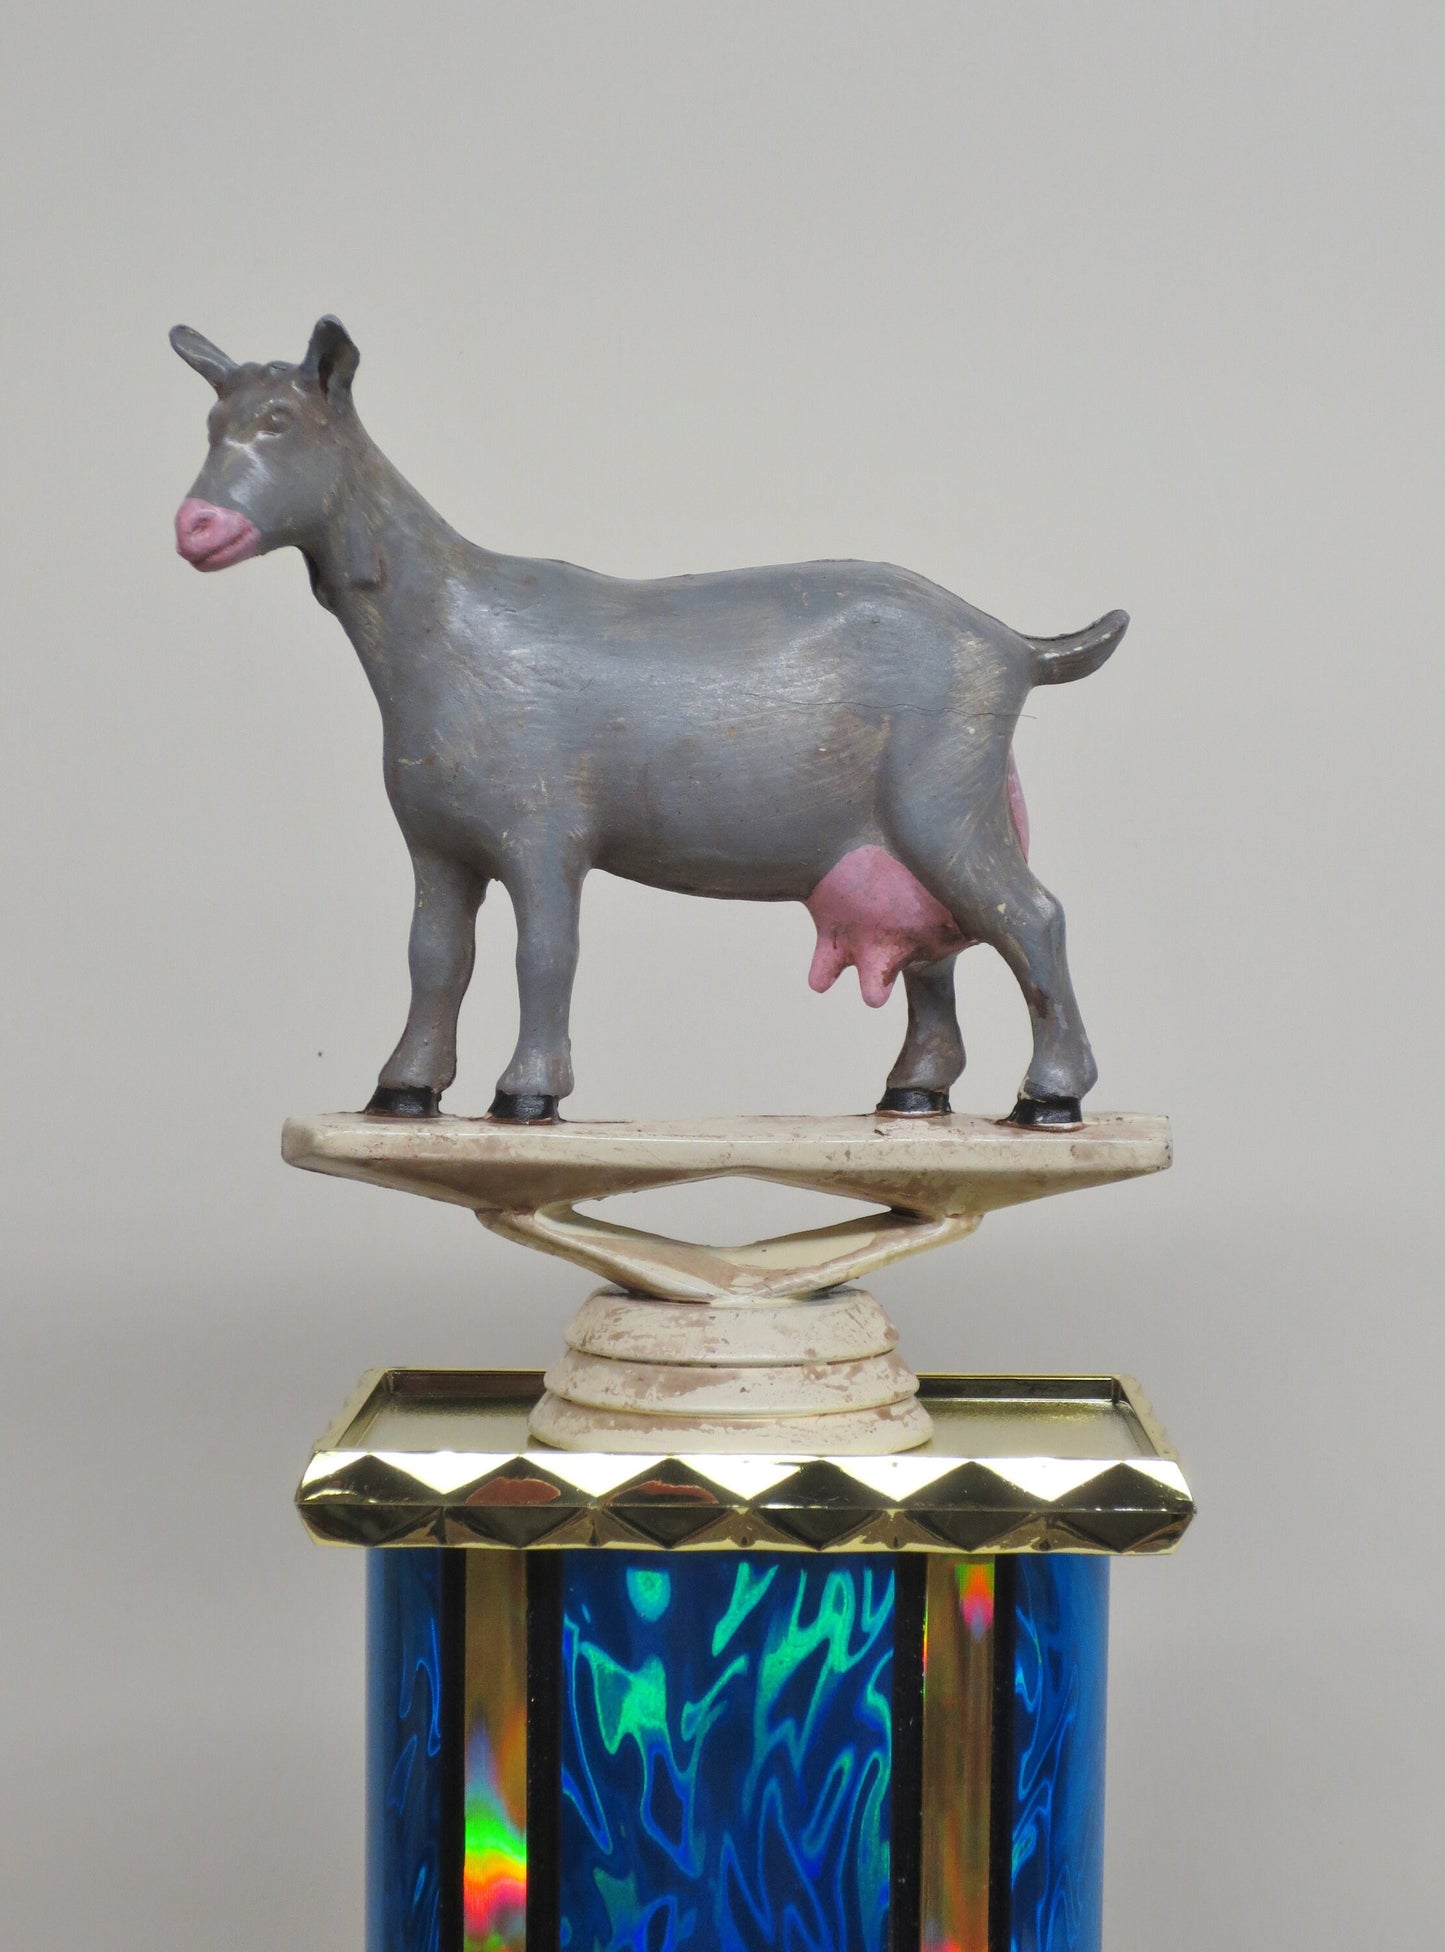 Funny Trophy GOAT Trophy Greatest of All Time Award Trophy Hand Painted Top Sales Motivational Achievement Award Personalized Winner